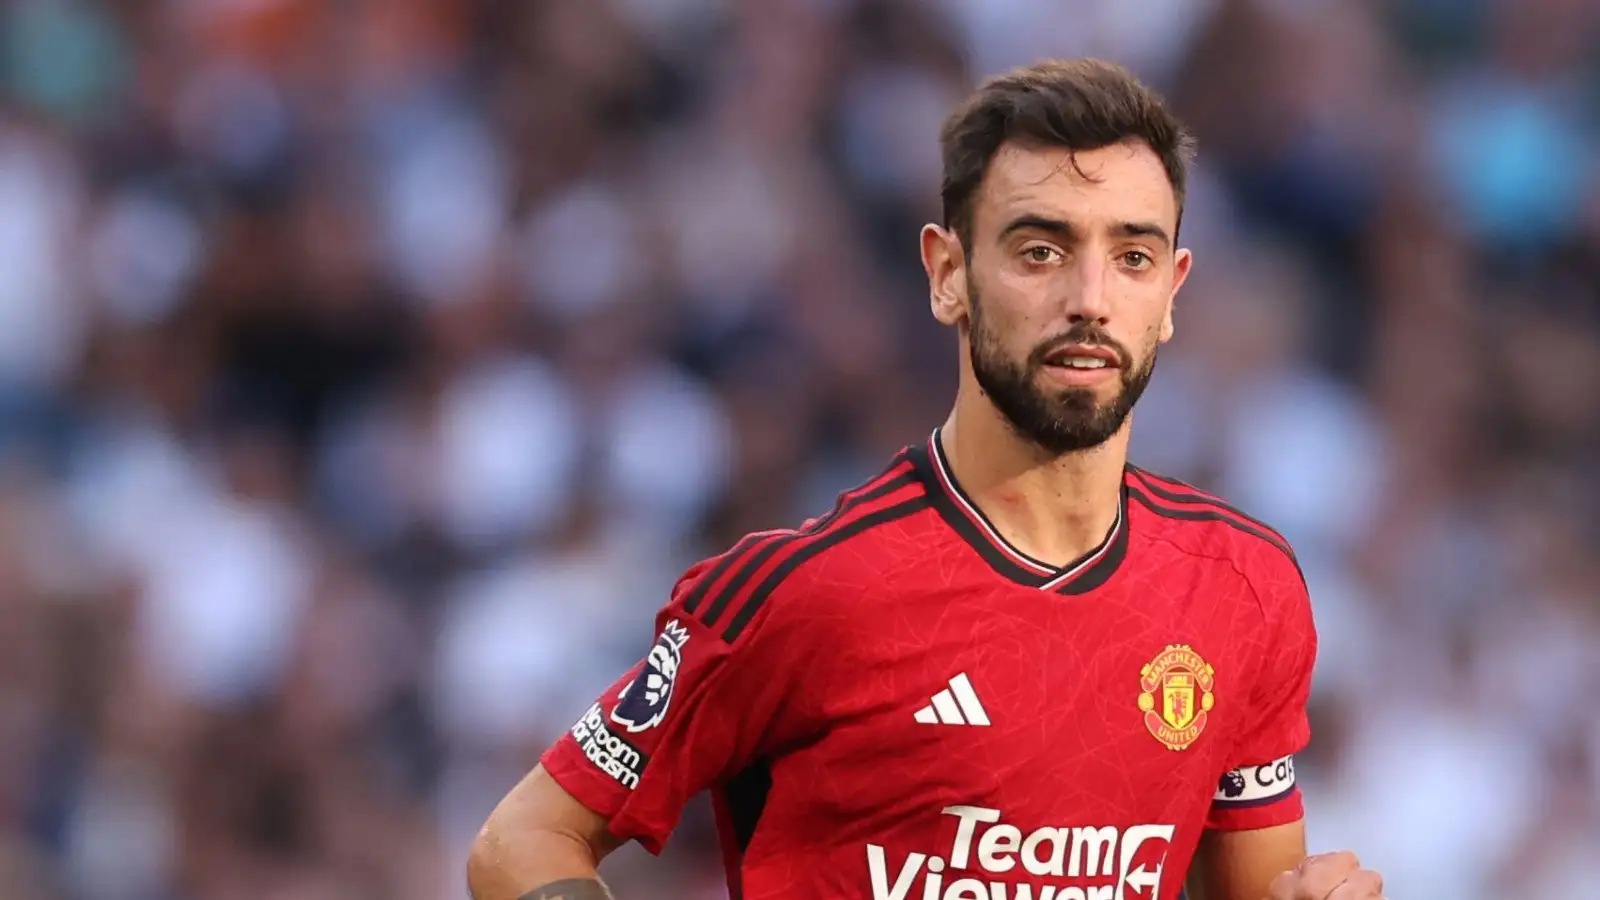 Forget the score, Man Utd fans: Bruno Fernandes has produced 2023’s sexiest rabona